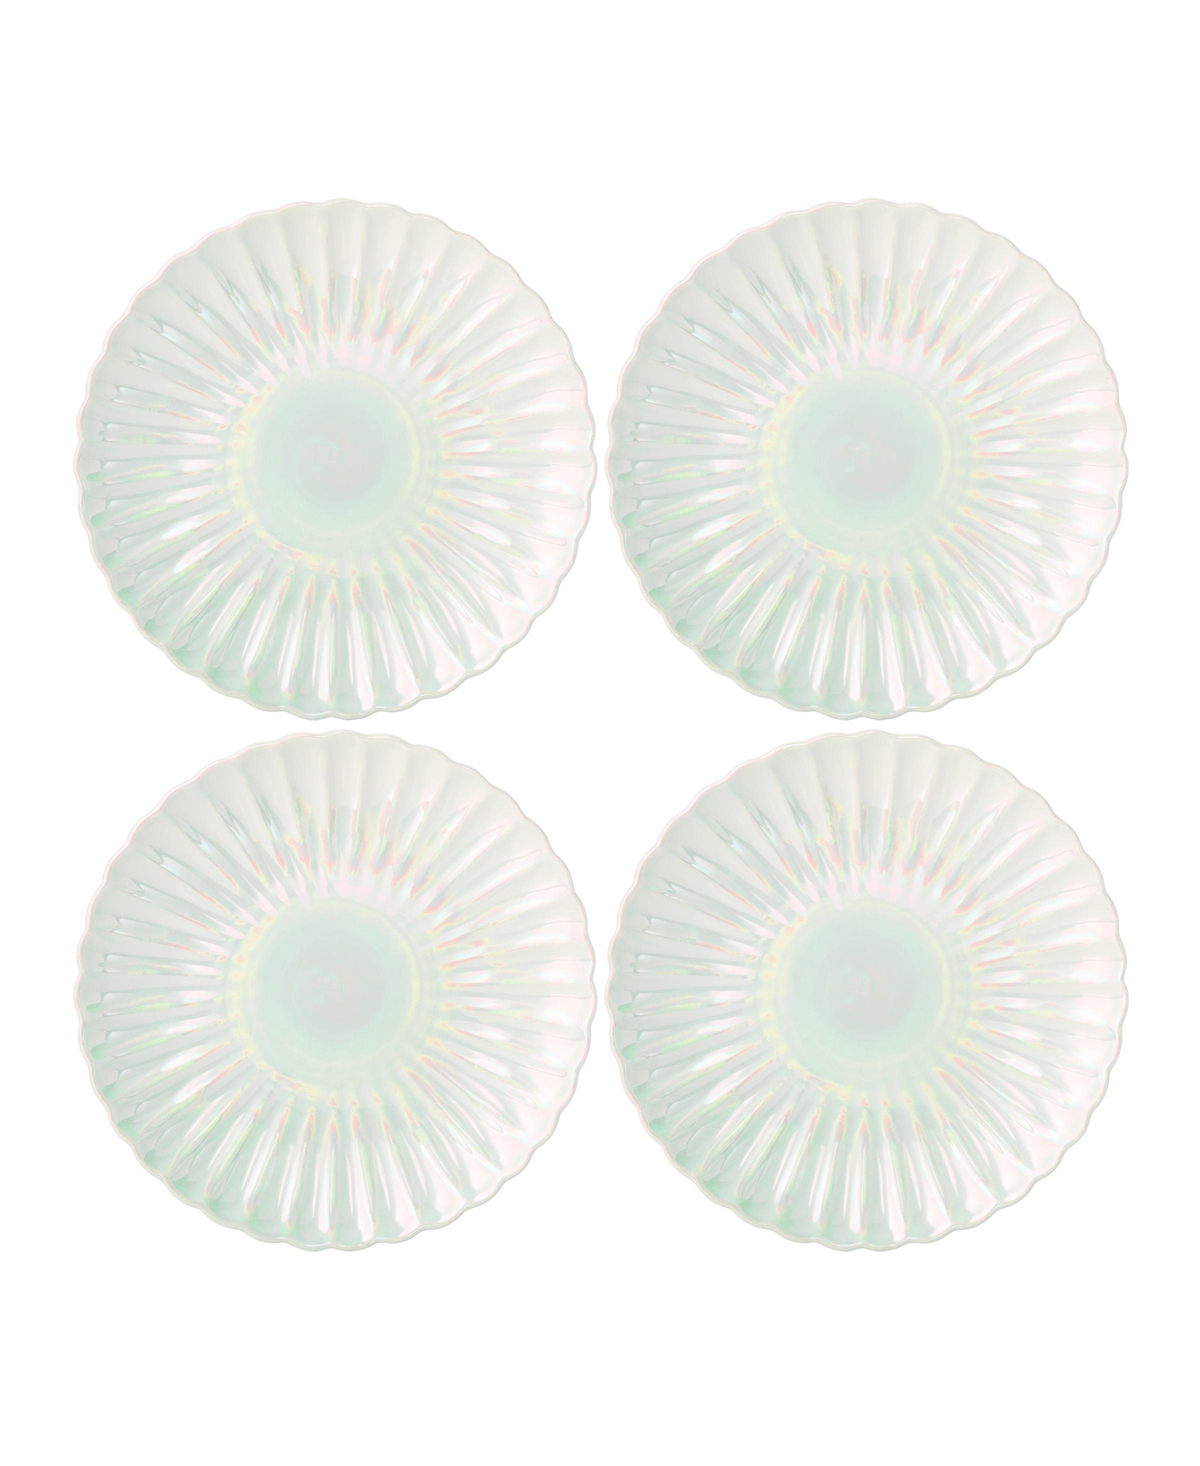 Pearl Scalloped Iridescent Appetizer Plates